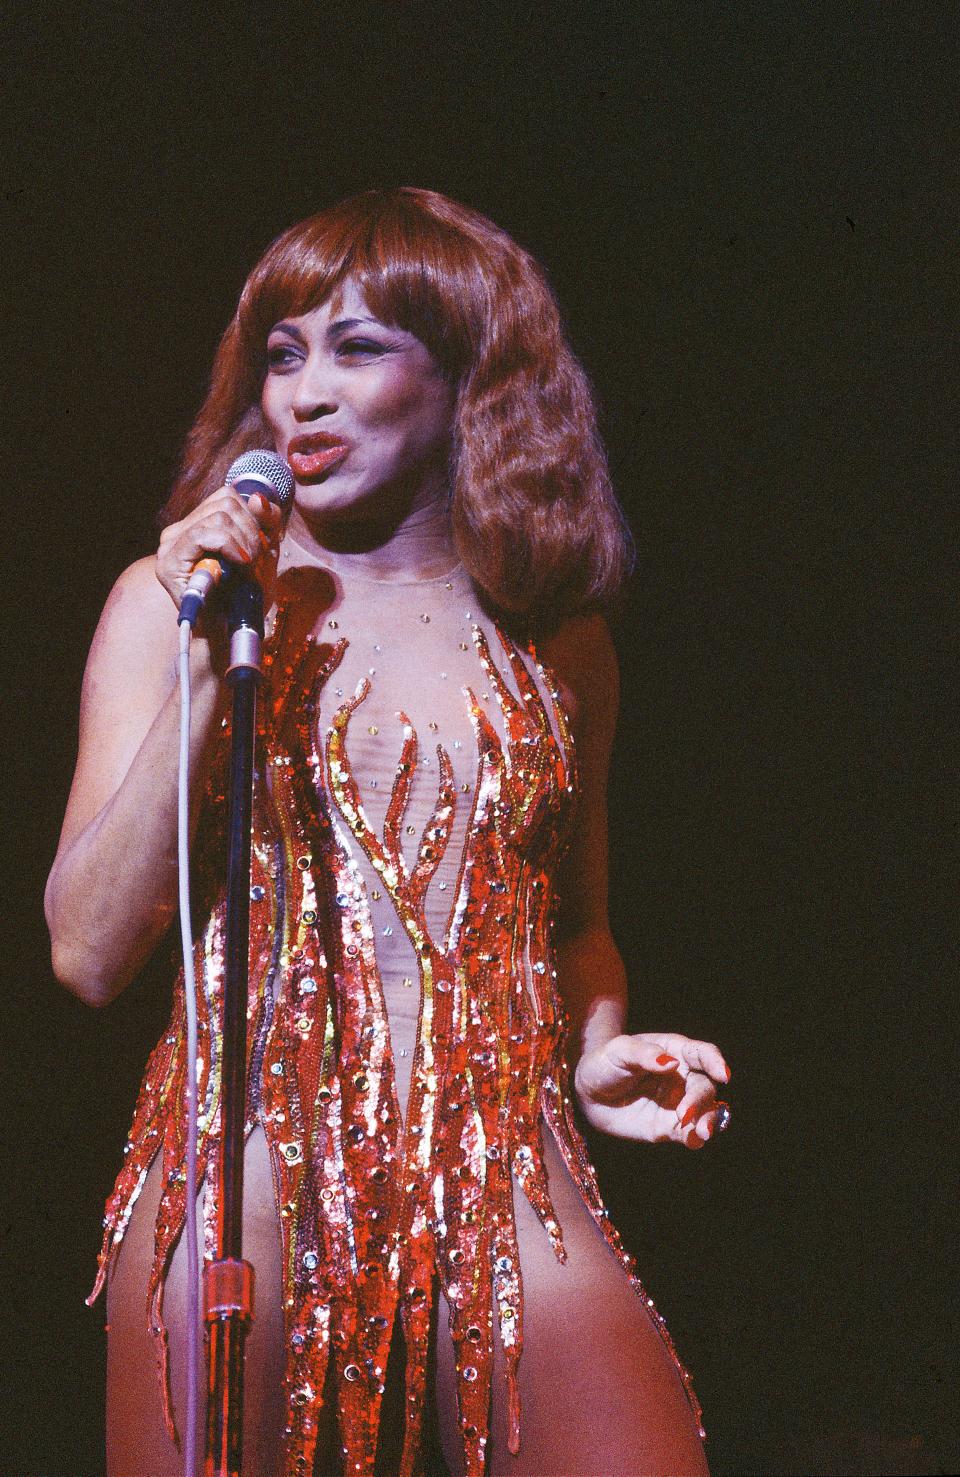 UNITED STATES - JANUARY 01:  Photo of Tina TURNER; performing live onstage c.1979, solo era  (Photo by Gai Terrell/Redferns)